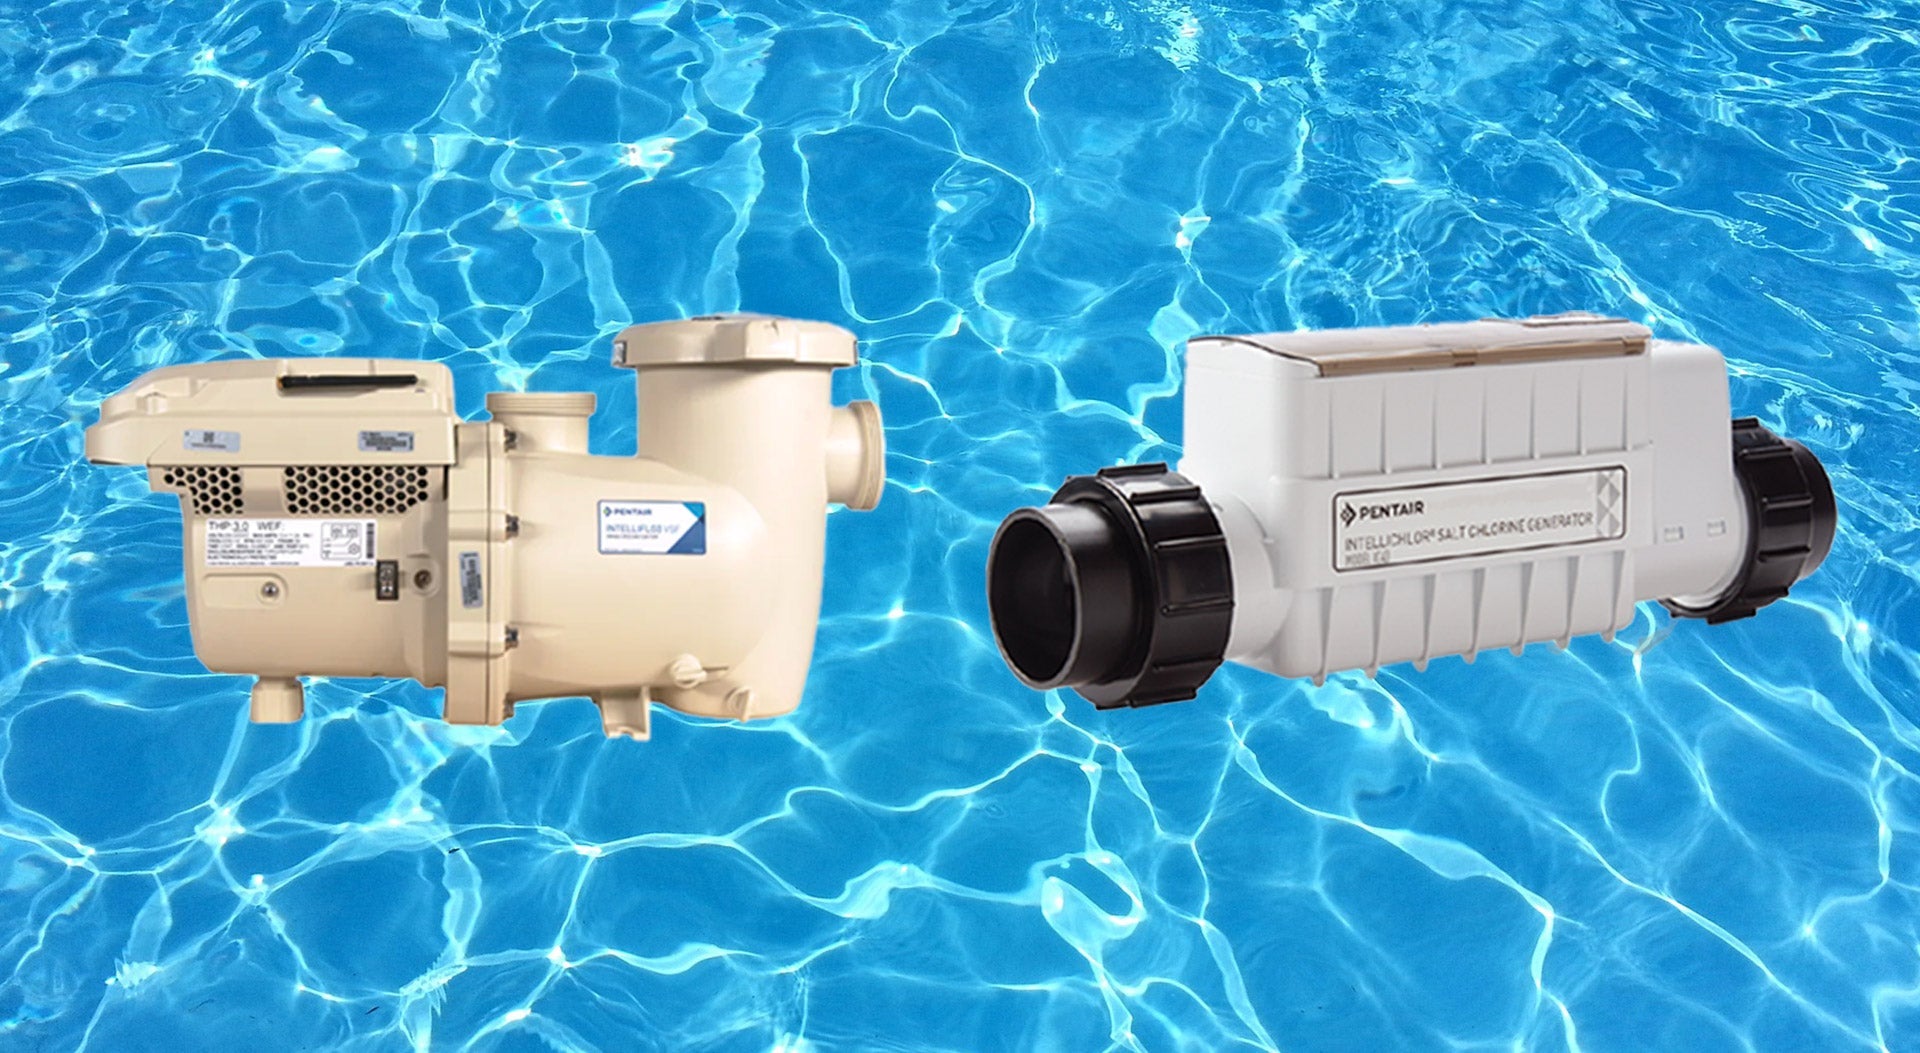 Your Best Pentair Dealer for Pool Pumps & IntelliChlor Generators - Outshining the Rest! - Aqua Pool Supply